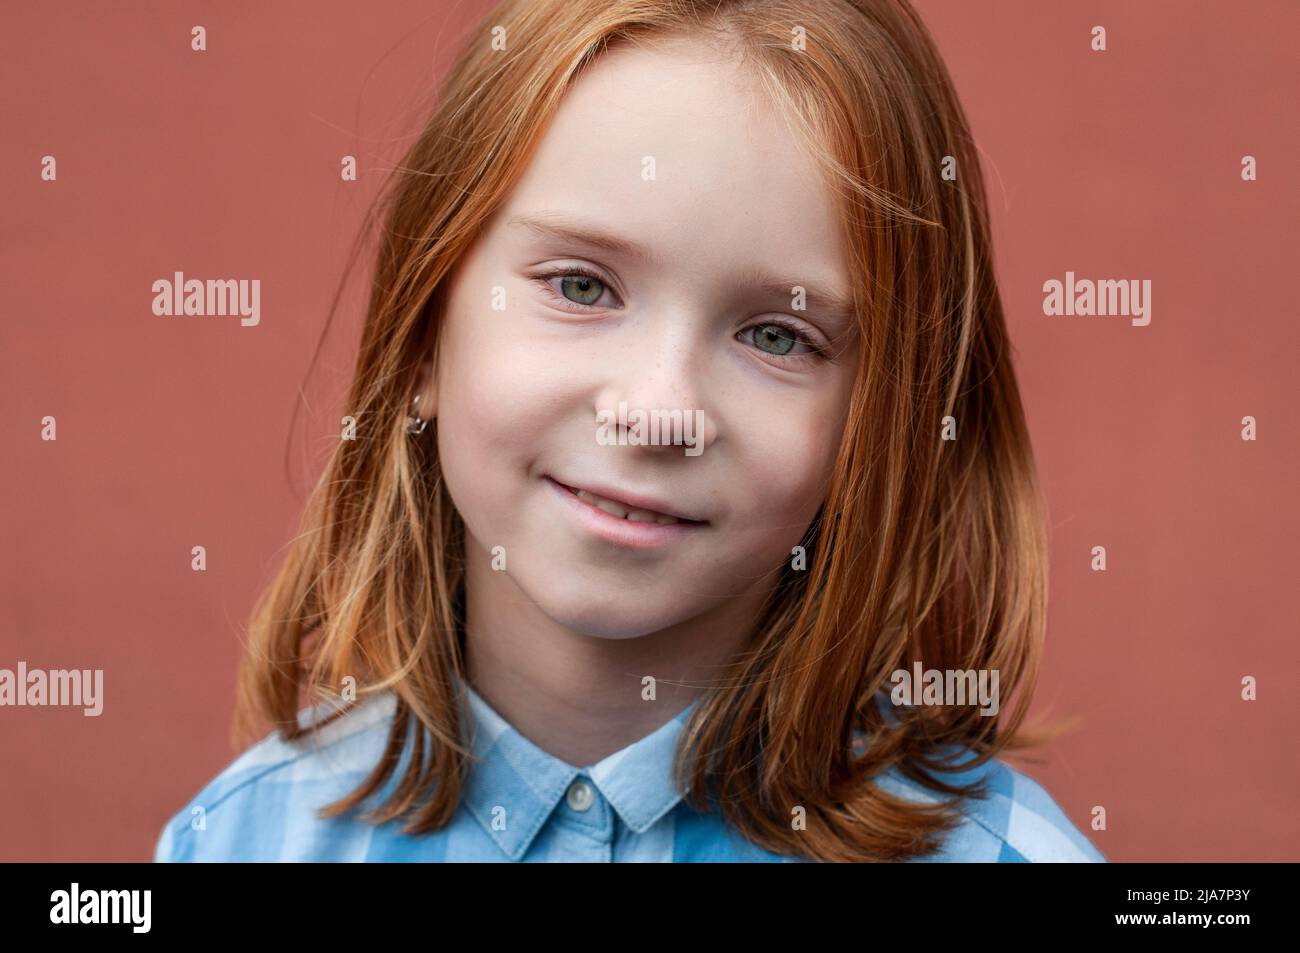 Portrait of a red-haired child with green eyes 8 years old in a blue shirt on a teracot background. Stock Photo